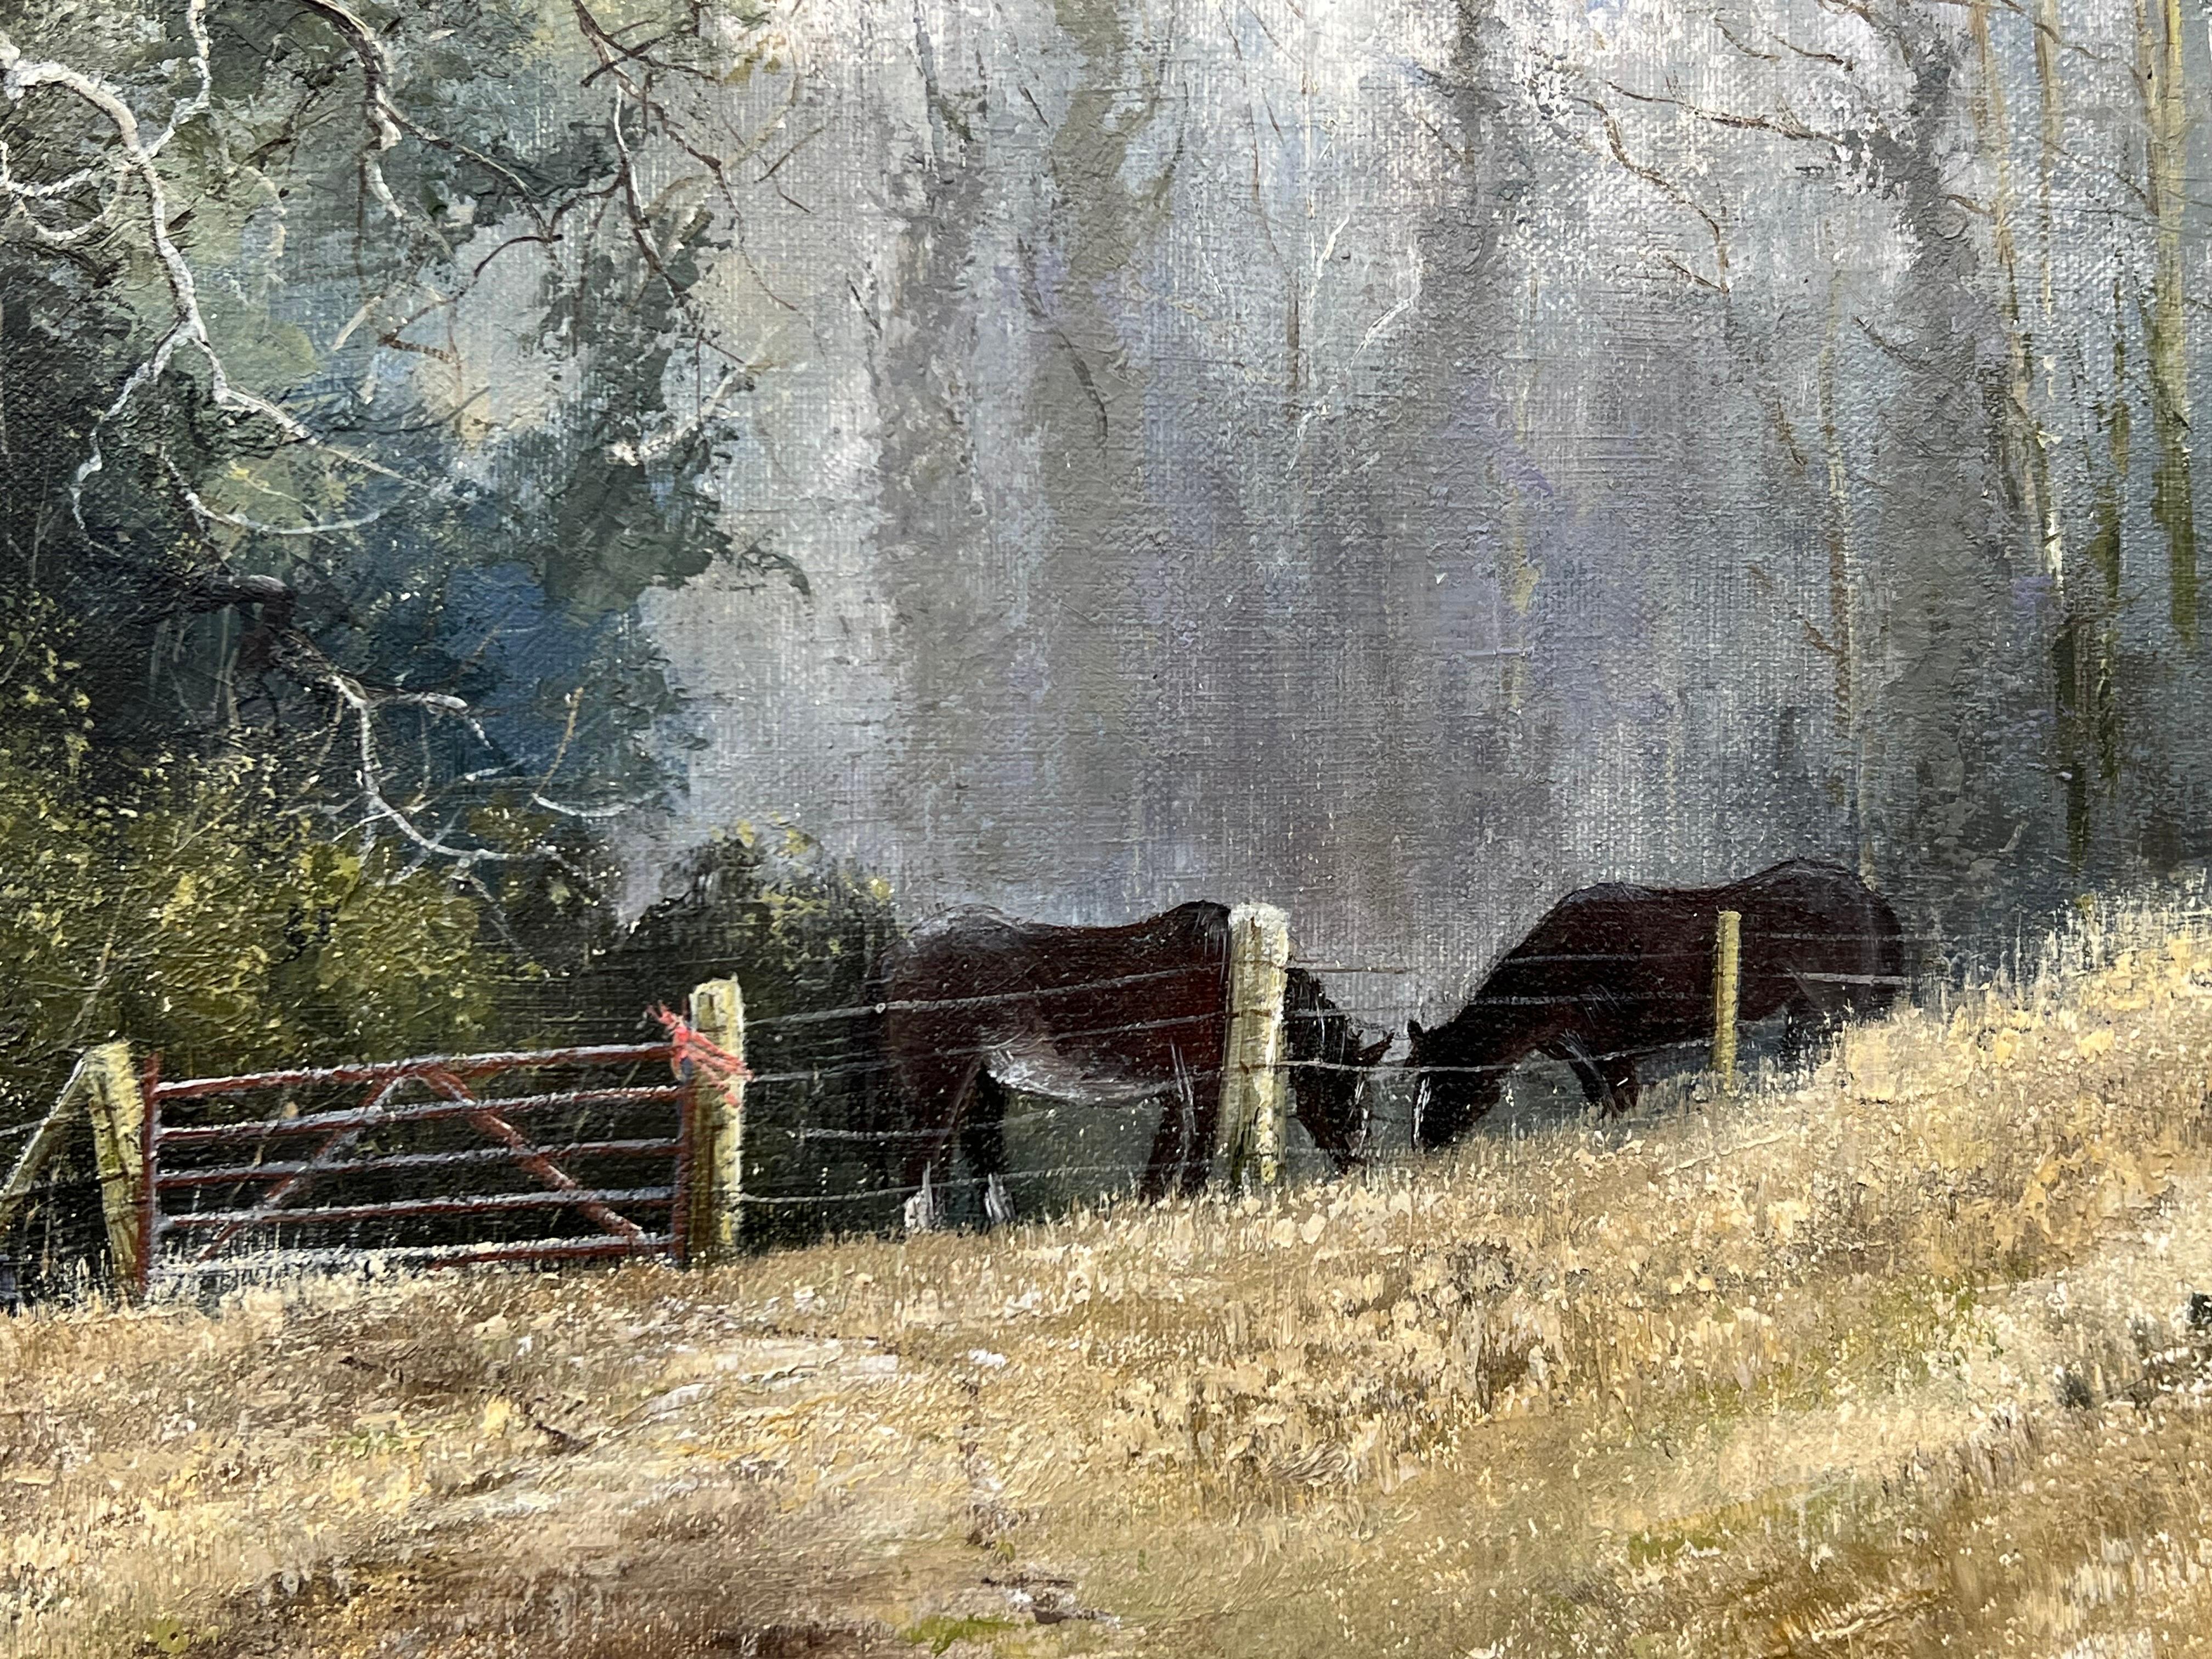 Painting of Horses feeding in the English Countryside by Dennis Harper, ( b. 1940) 
British Artist known for his Realist Oil Paintings, Harper is an active member of several art societies and exhibited widely in the UK. 

Art measures 16 x 20 inches